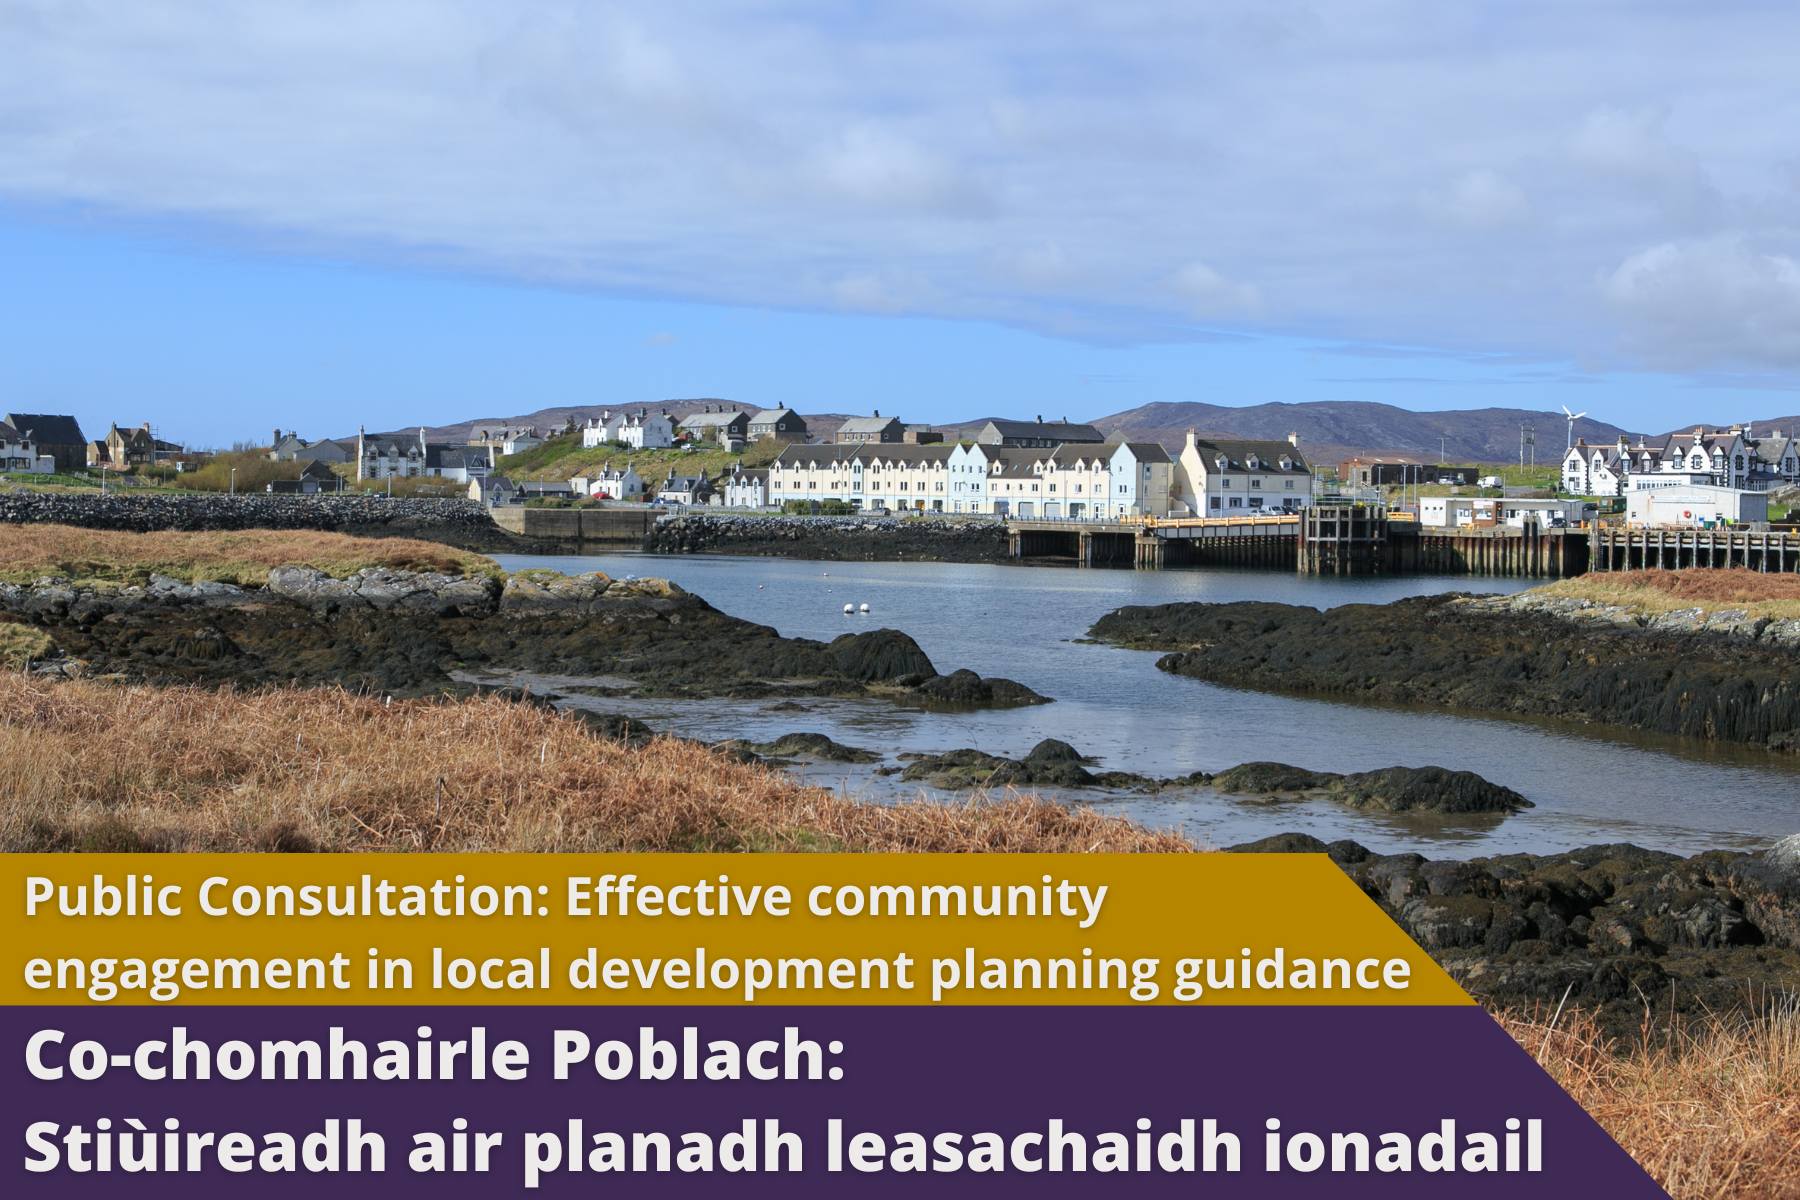 Picture: A pier in a scottish island villiage. Text reads ' Public Consultation: Effective Community Engagement in Local Development Planning Guidance'